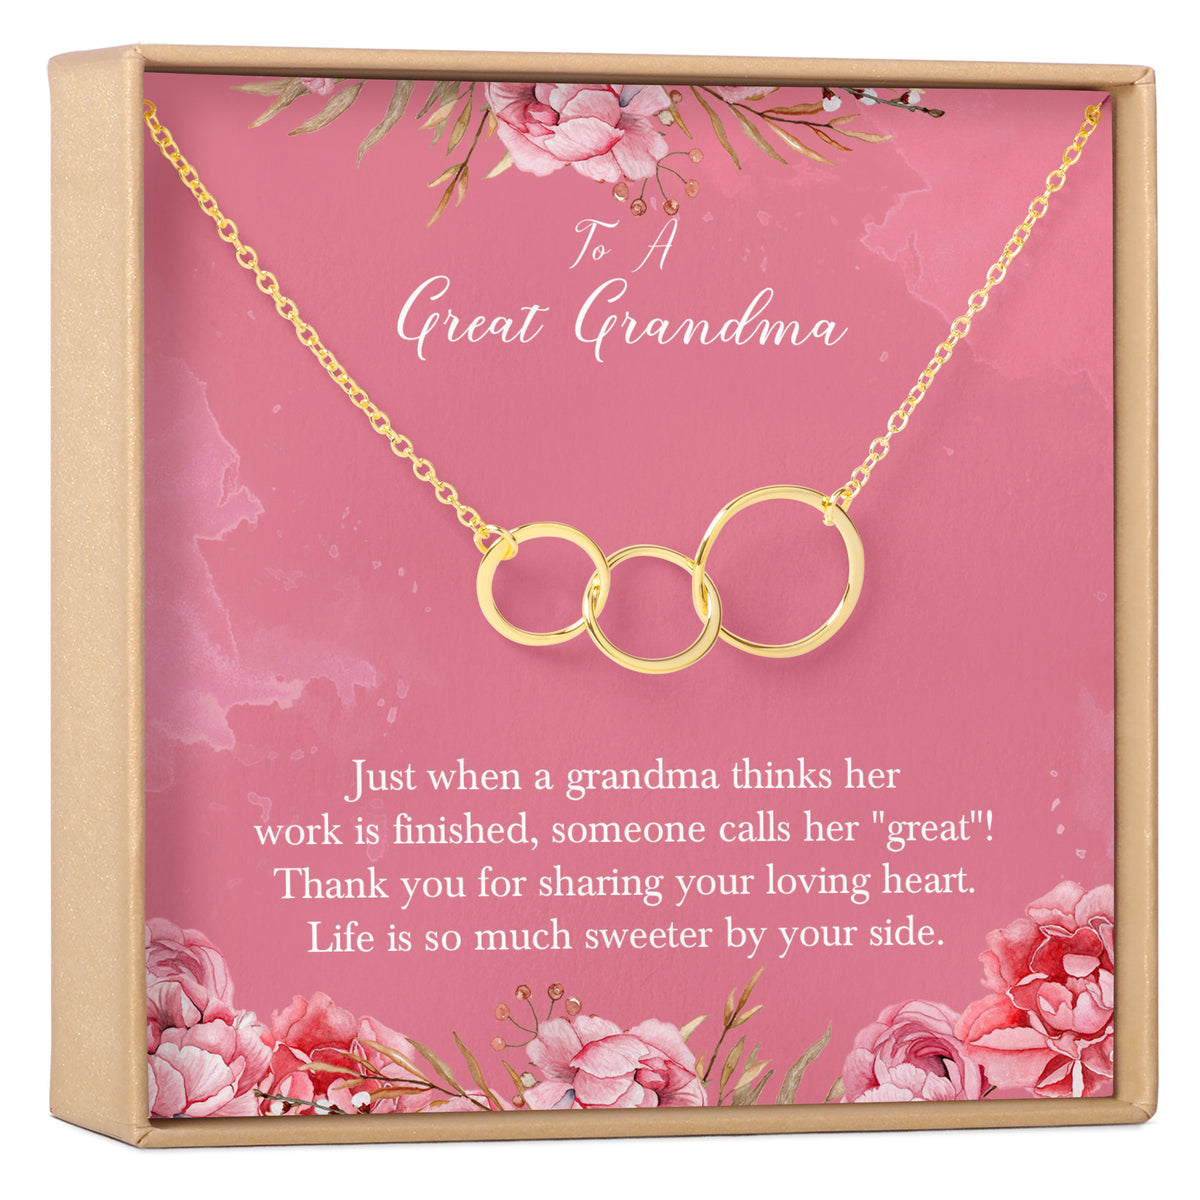 Great Grandmother Necklace, Multiple Styles